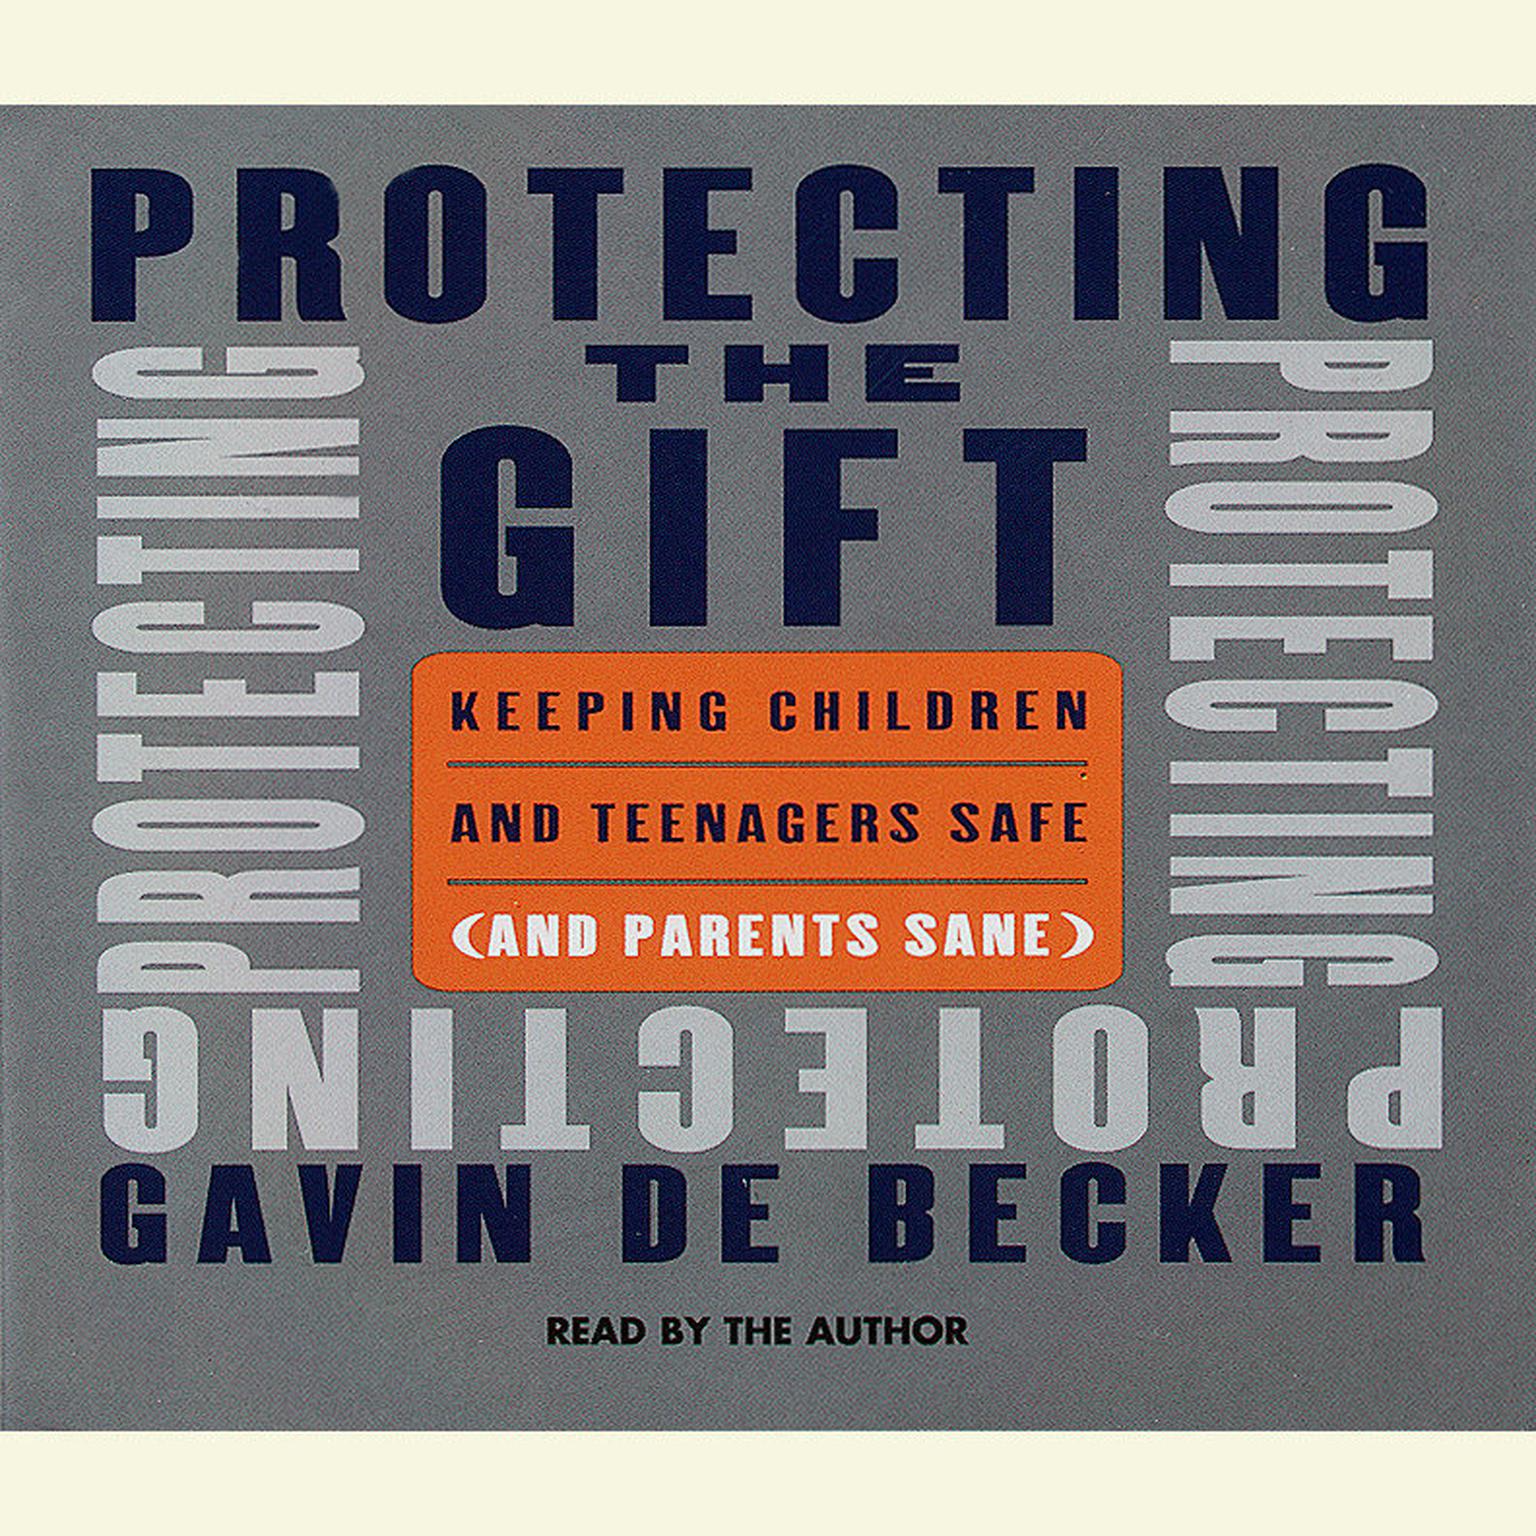 Protecting the Gift (Abridged): Keeping Children and Teenagers Safe (and Parents Sane) Audiobook, by Gavin de Becker